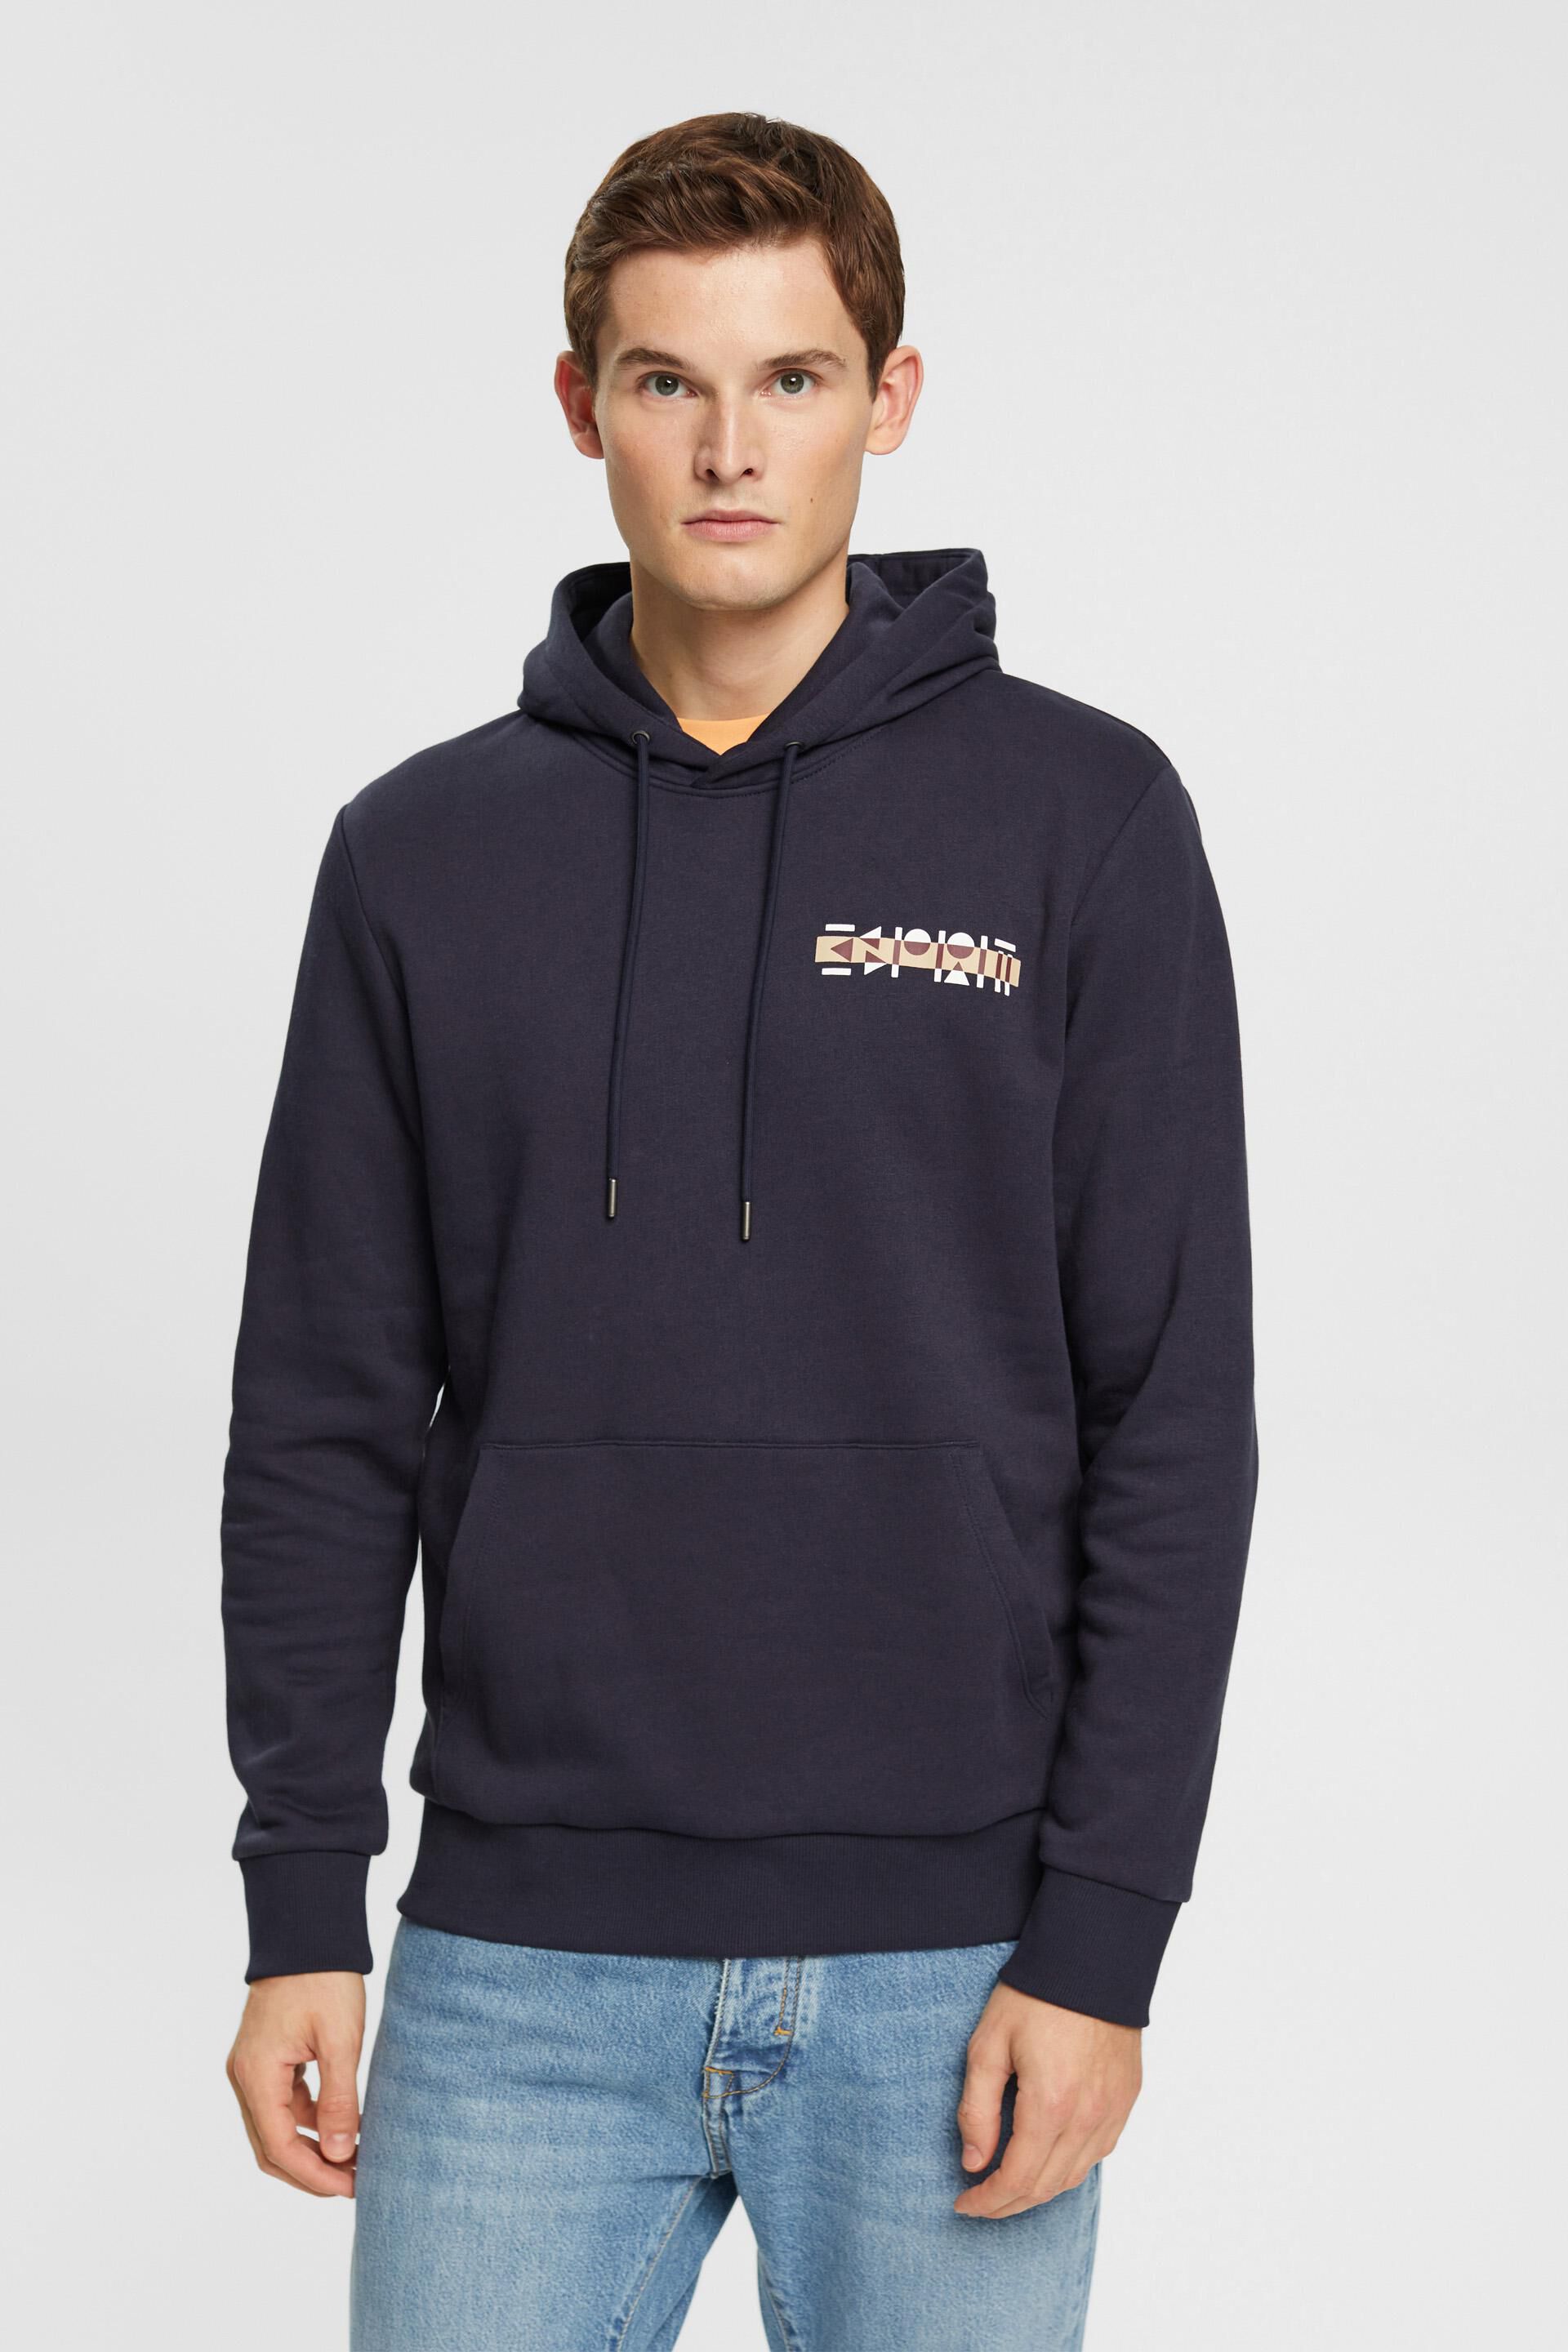 Esprit Hoodie with logo small print